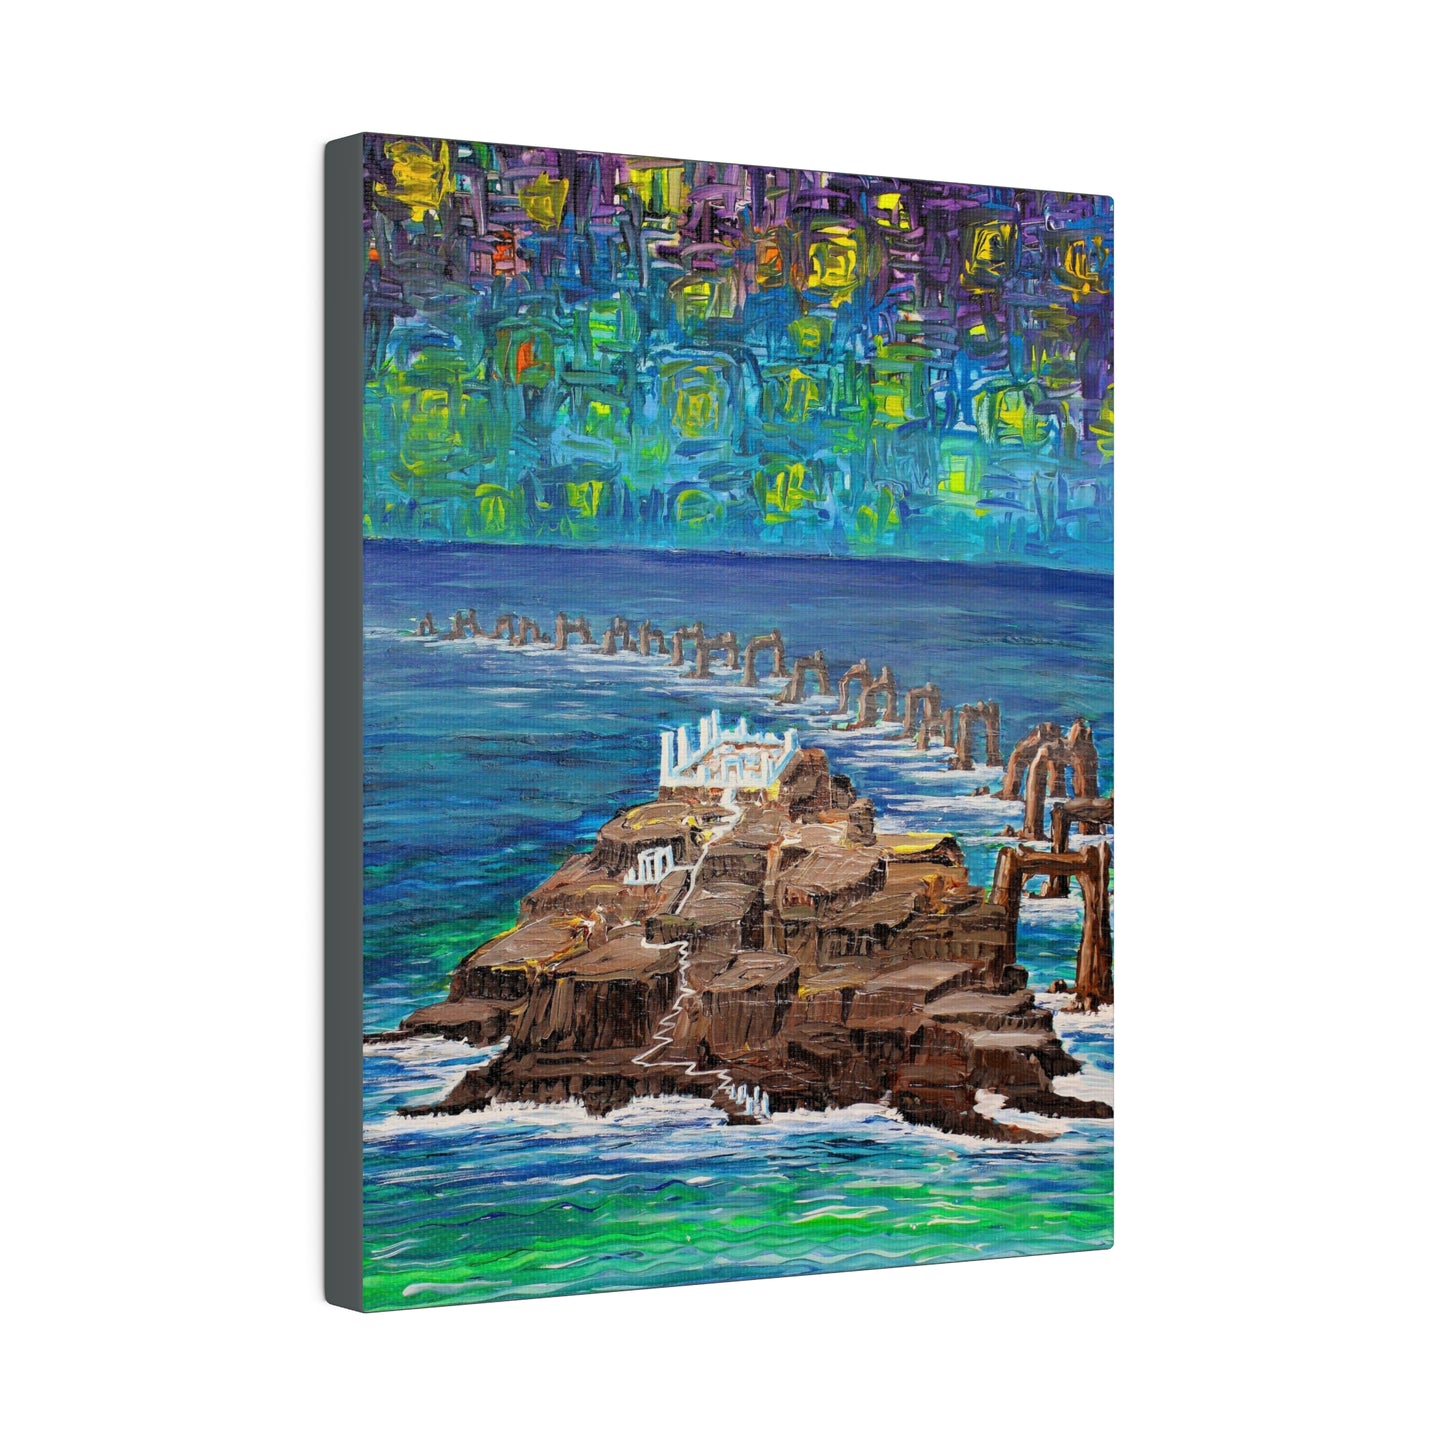 Calm Sea and Mysterious Sky Painting on Canvas